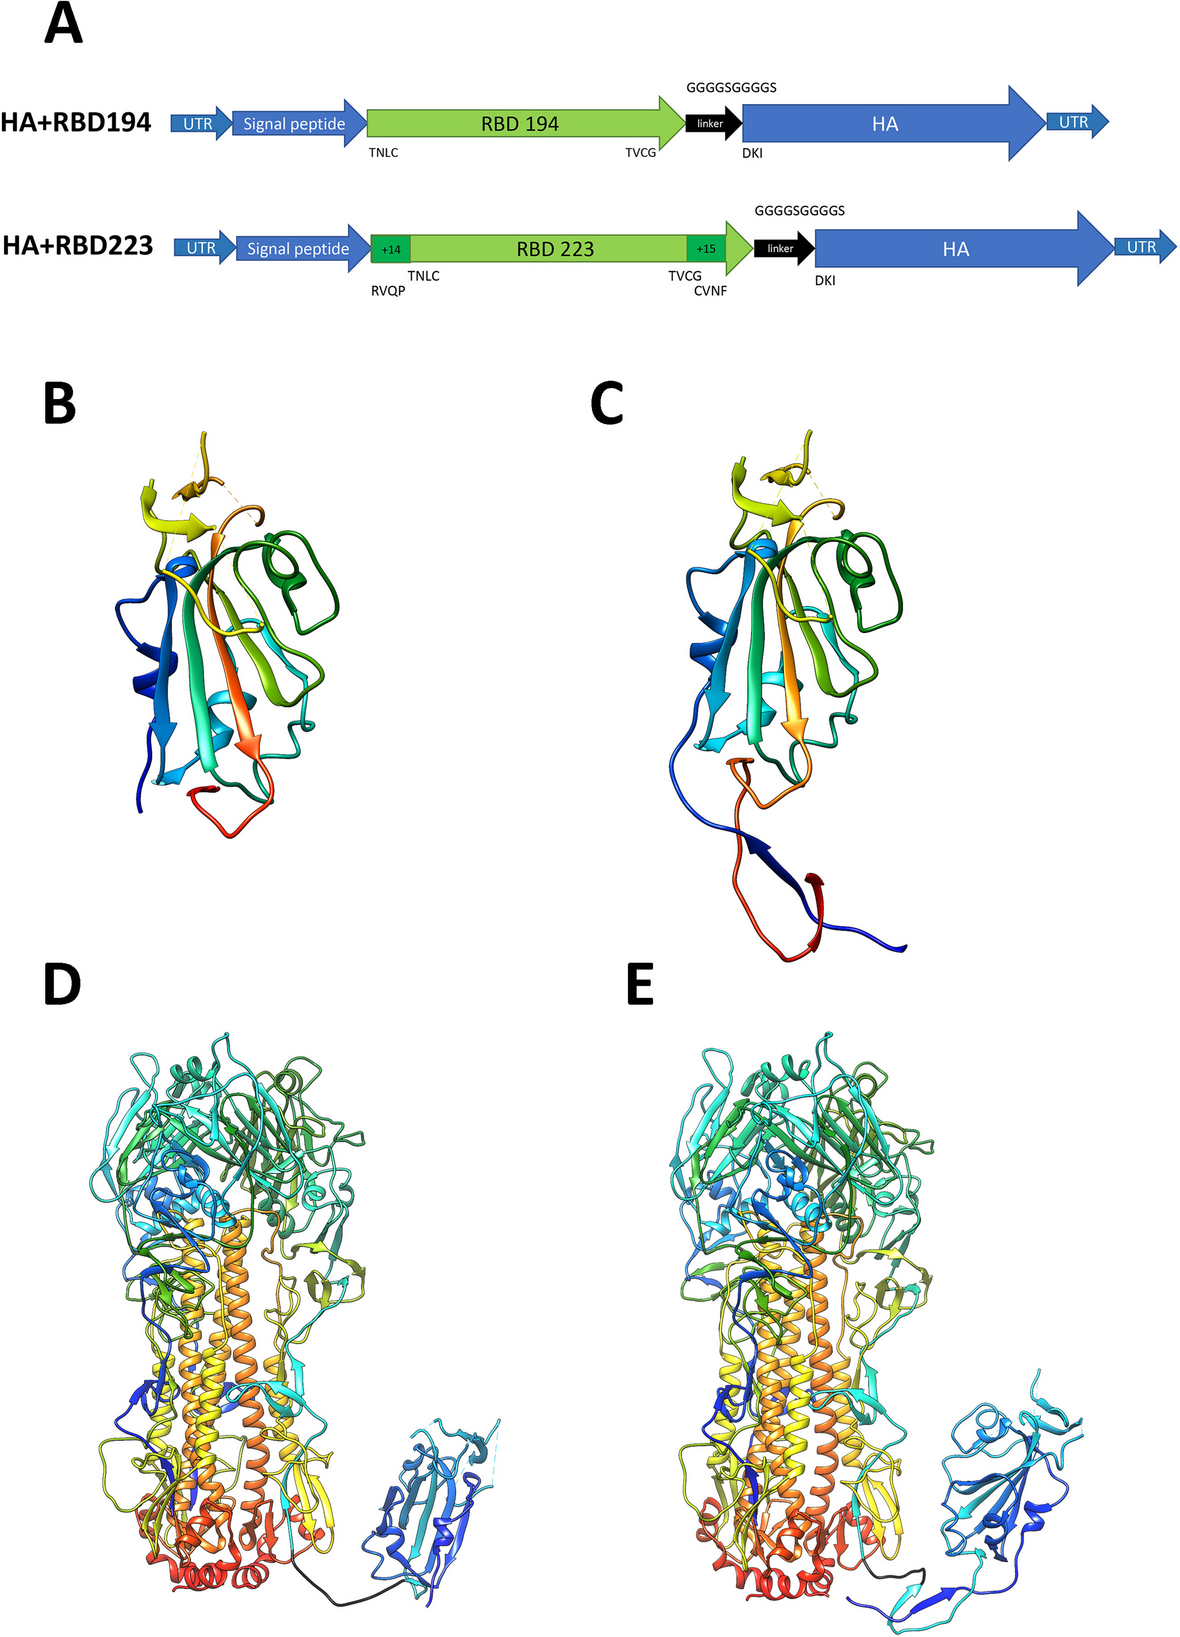 Expression of the SARS-CoV-2 receptor-binding domain by live attenuated influenza vaccine virus as a strategy for designing a bivalent vaccine against COVID-19 and influenza